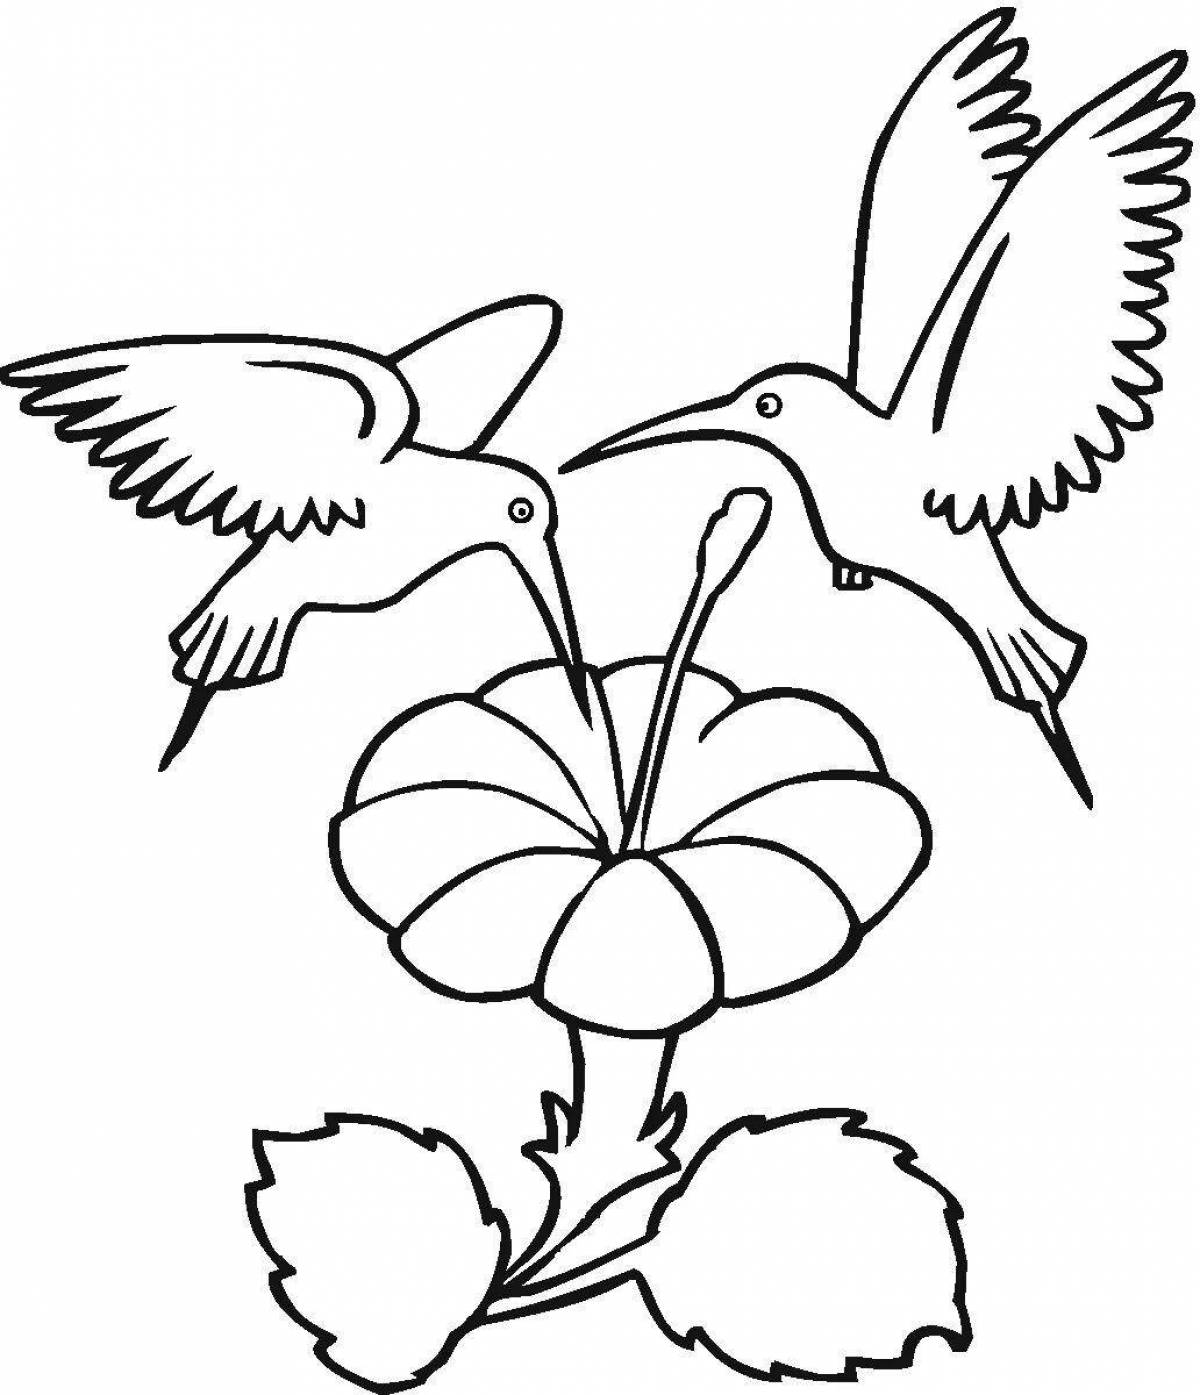 Dazzling hummingbird coloring book for kids